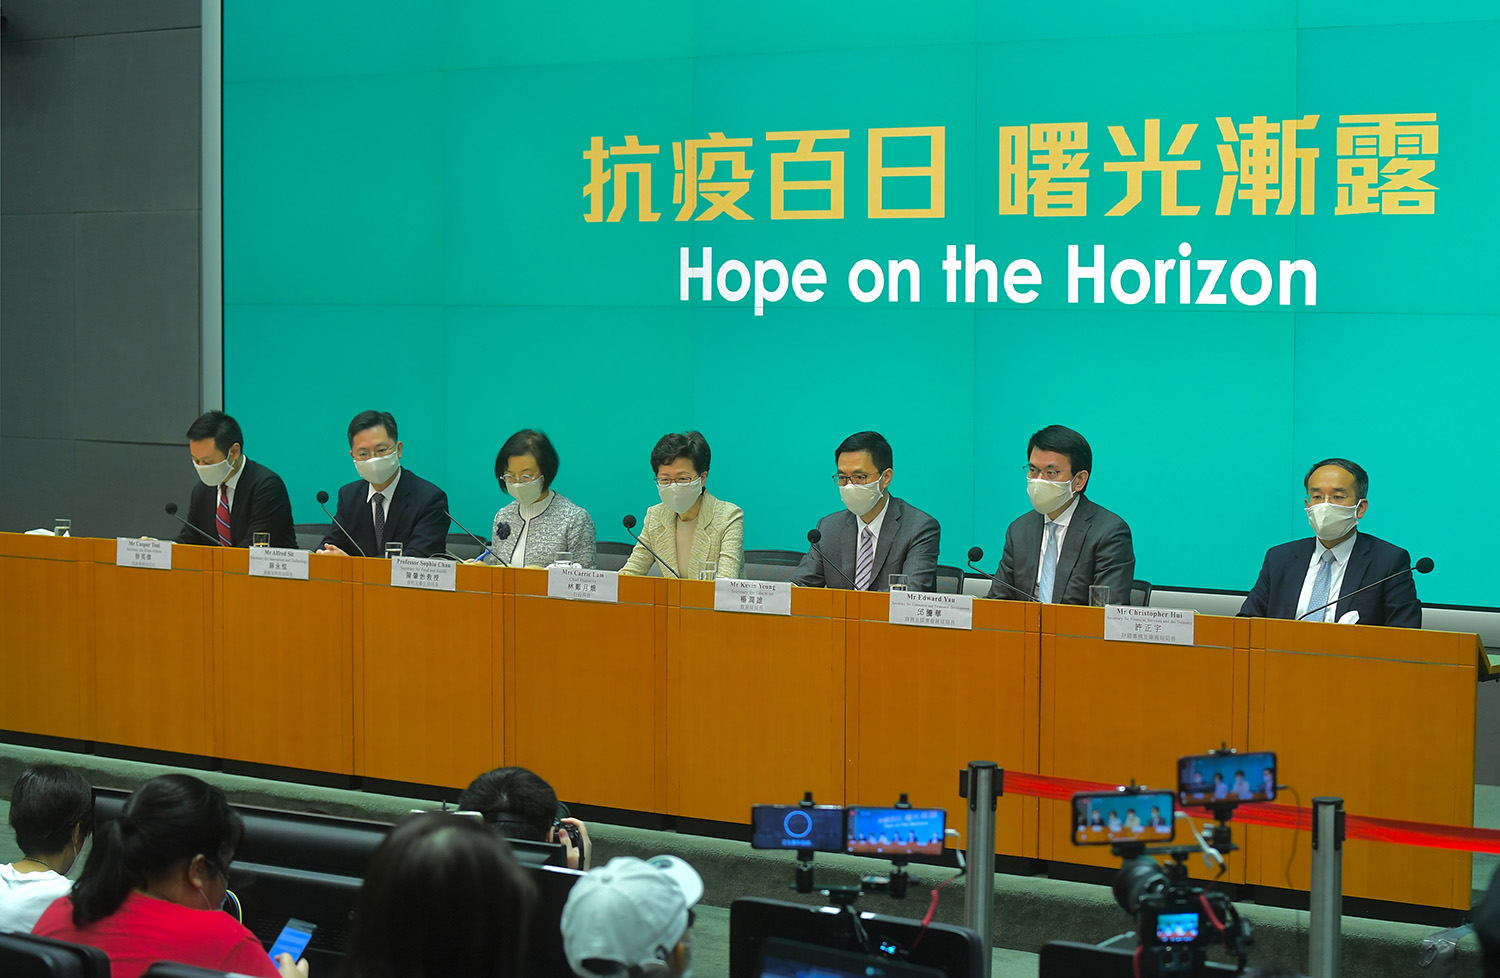 CE holds press conference (5.5.2020)